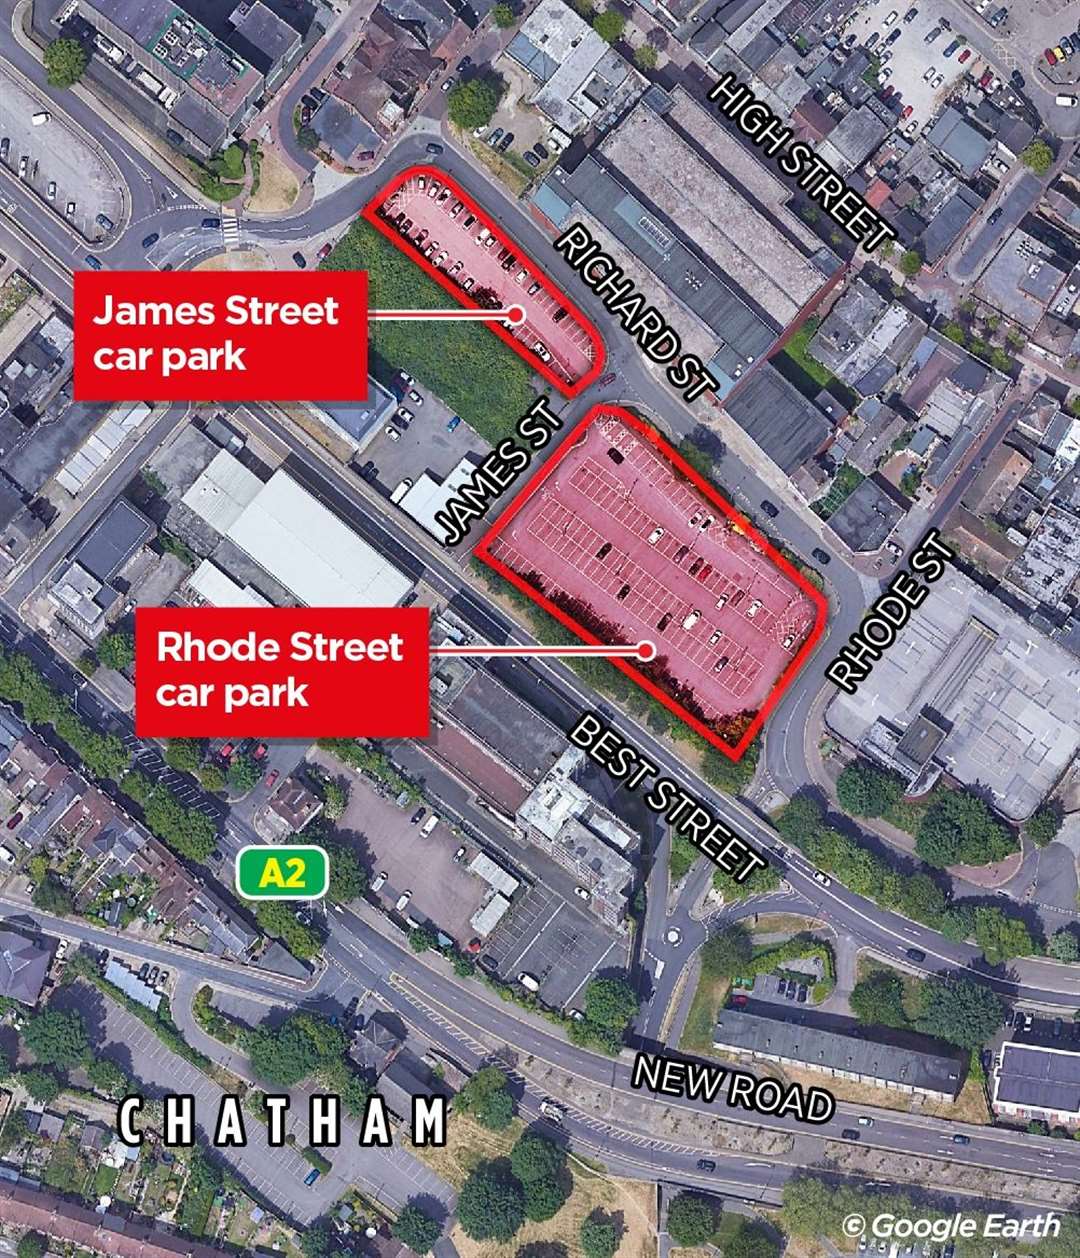 James Street car park and Rhode Street car park in Chatham are just a few yards apart